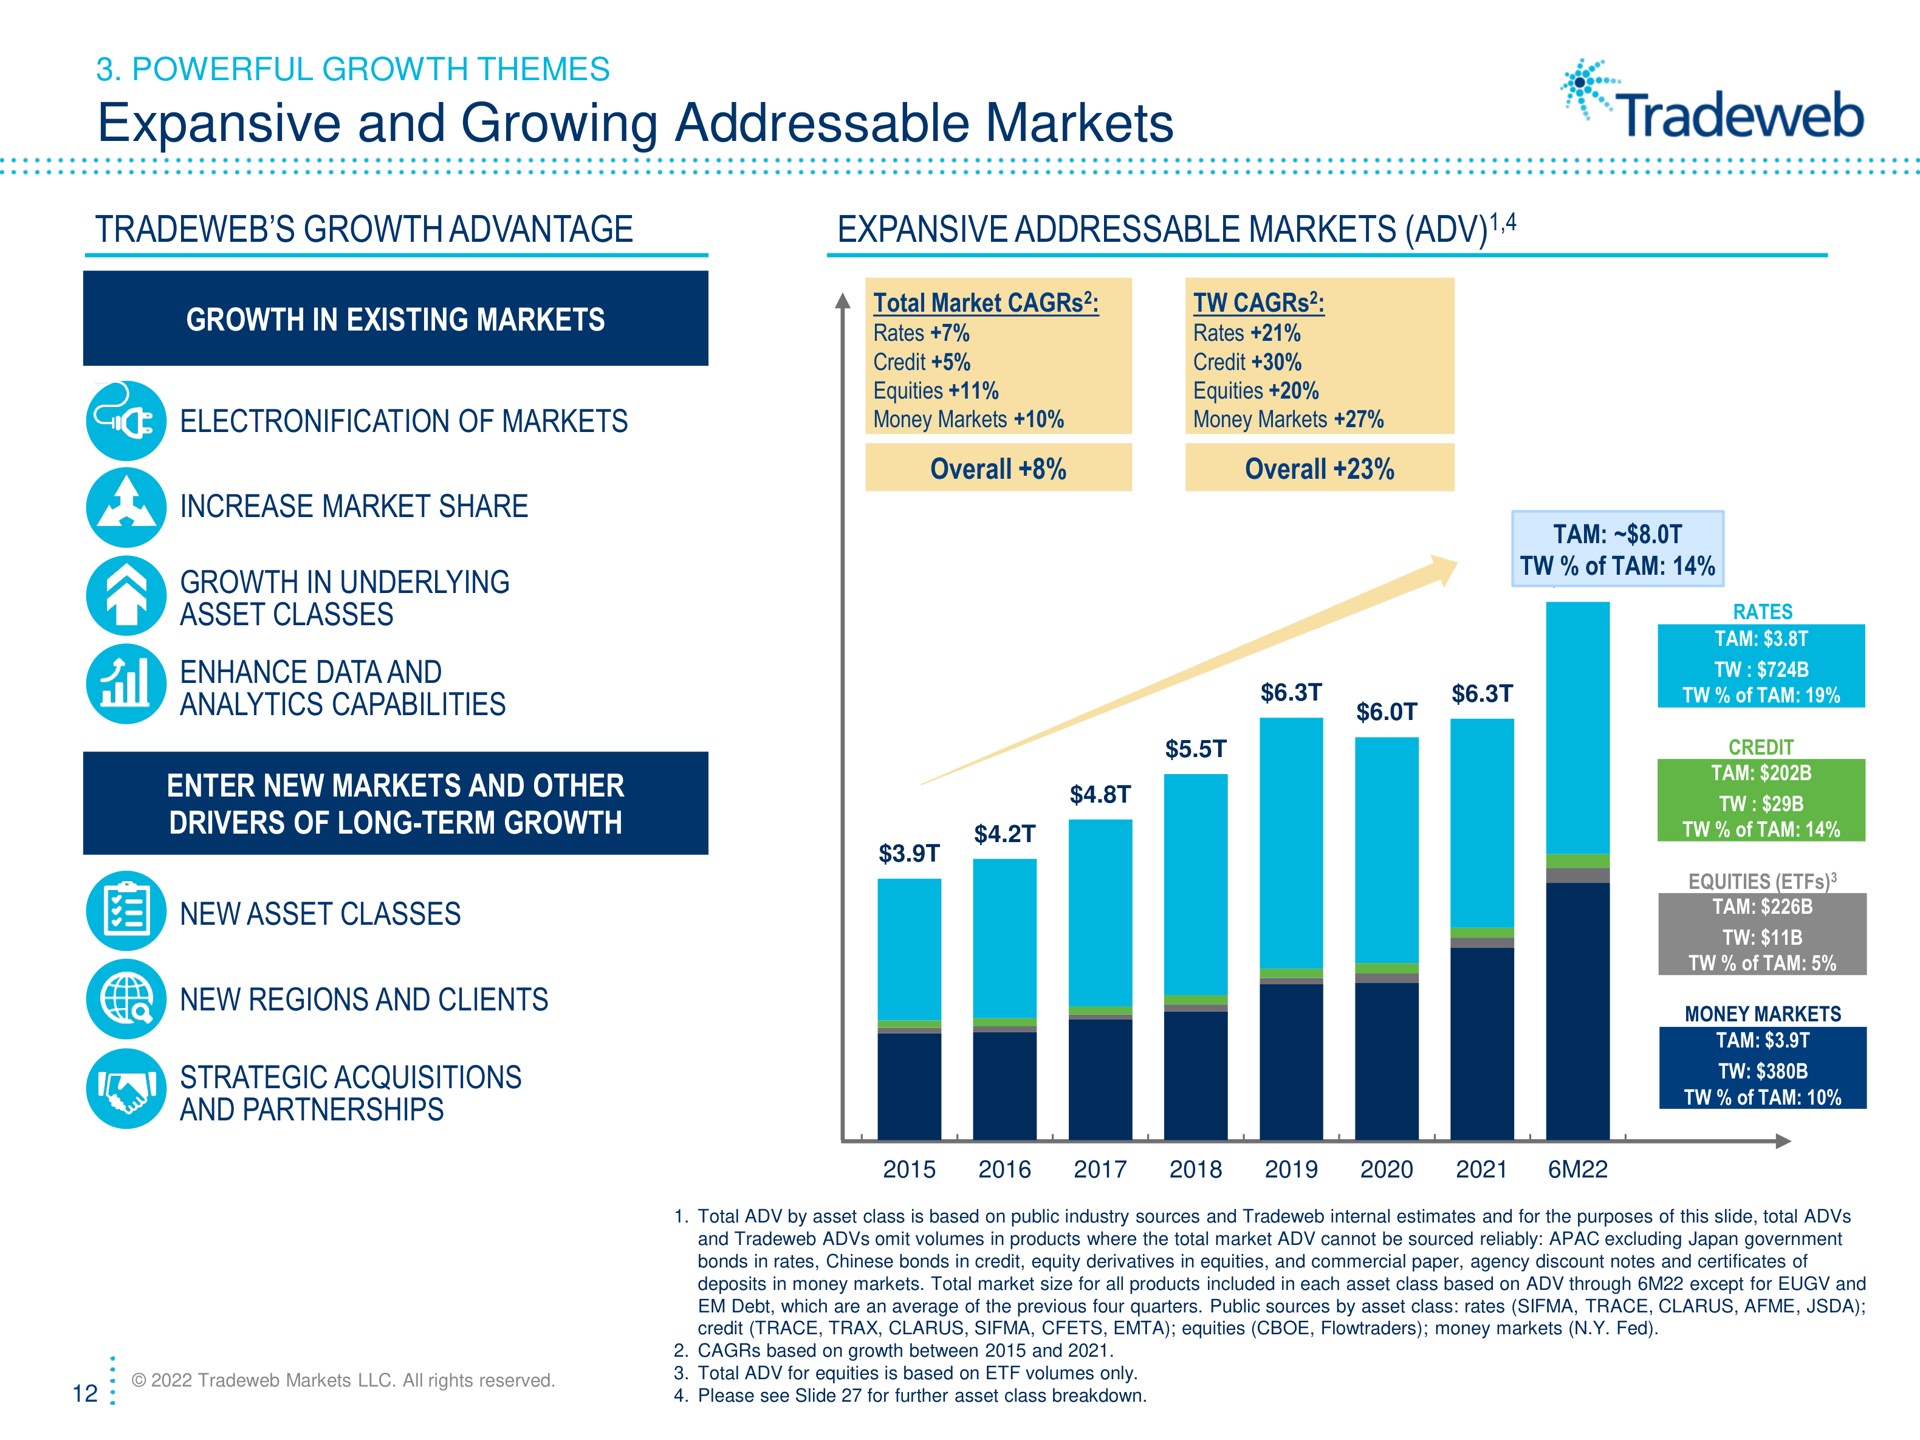 expansive and growing markets growth advantage expansive markets powerful themes money money overall overall of increase market share in underlying asset classes enhance data analytics capabilities enter new other drivers of long term new asset classes new regions clients strategic acquisitions partnerships tam of tam rates tam are | Tradeweb